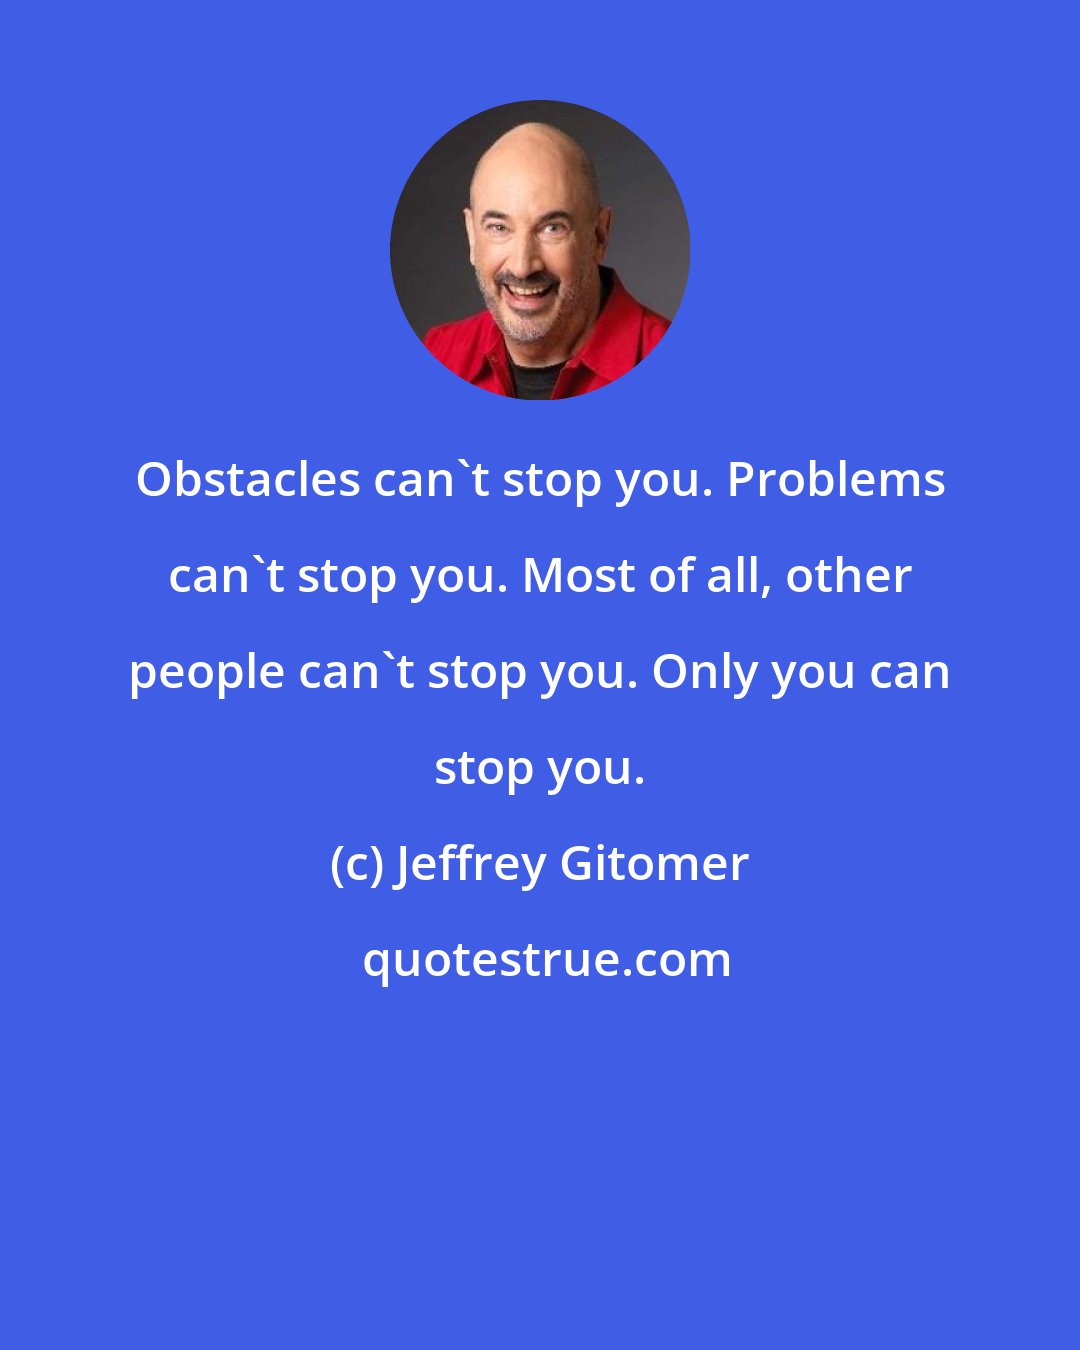 Jeffrey Gitomer: Obstacles can't stop you. Problems can't stop you. Most of all, other people can't stop you. Only you can stop you.